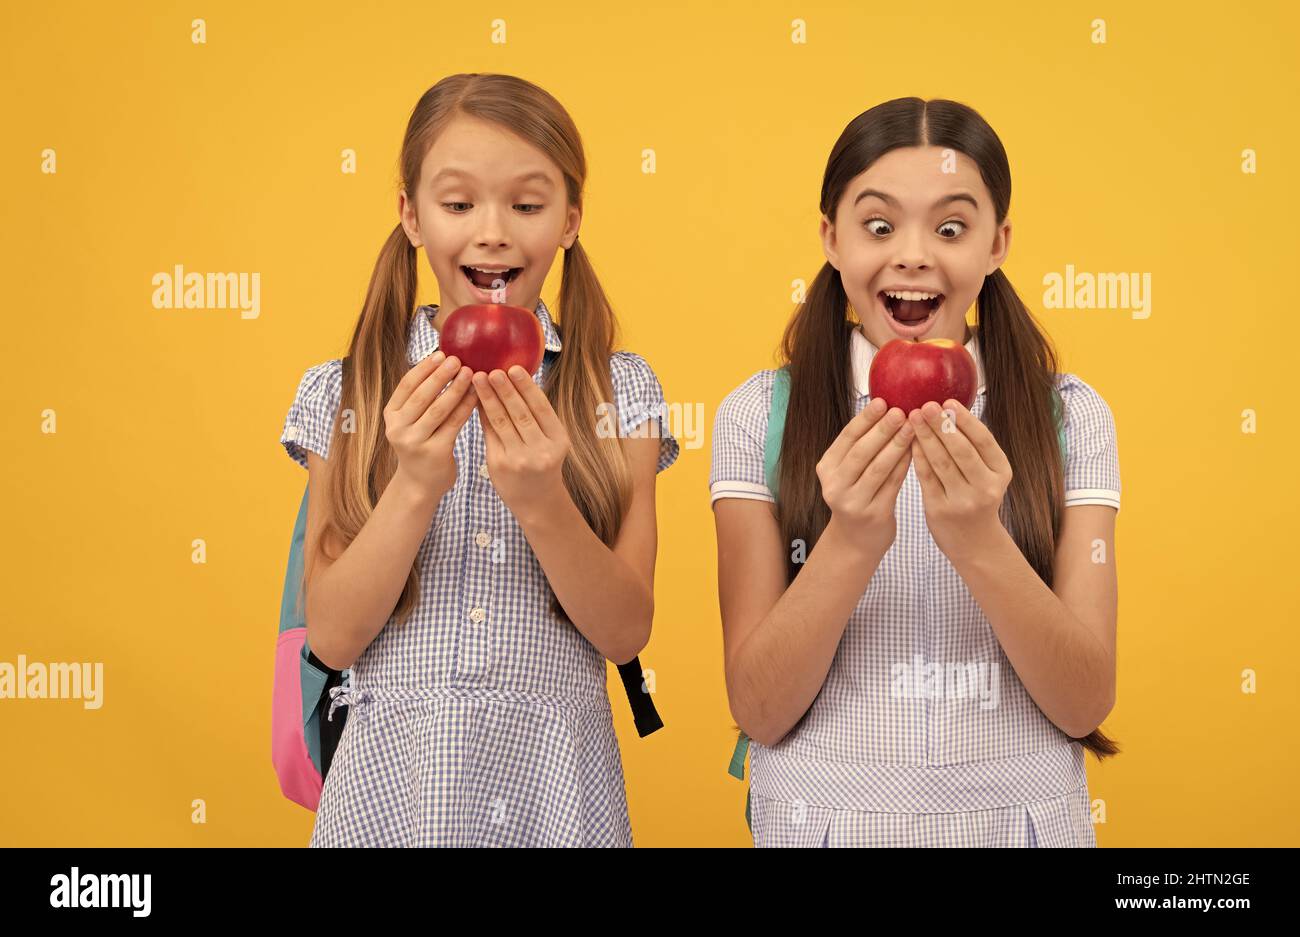 Nutrition for kids. Surprised children hold apples. School nutrition. Food education Stock Photo